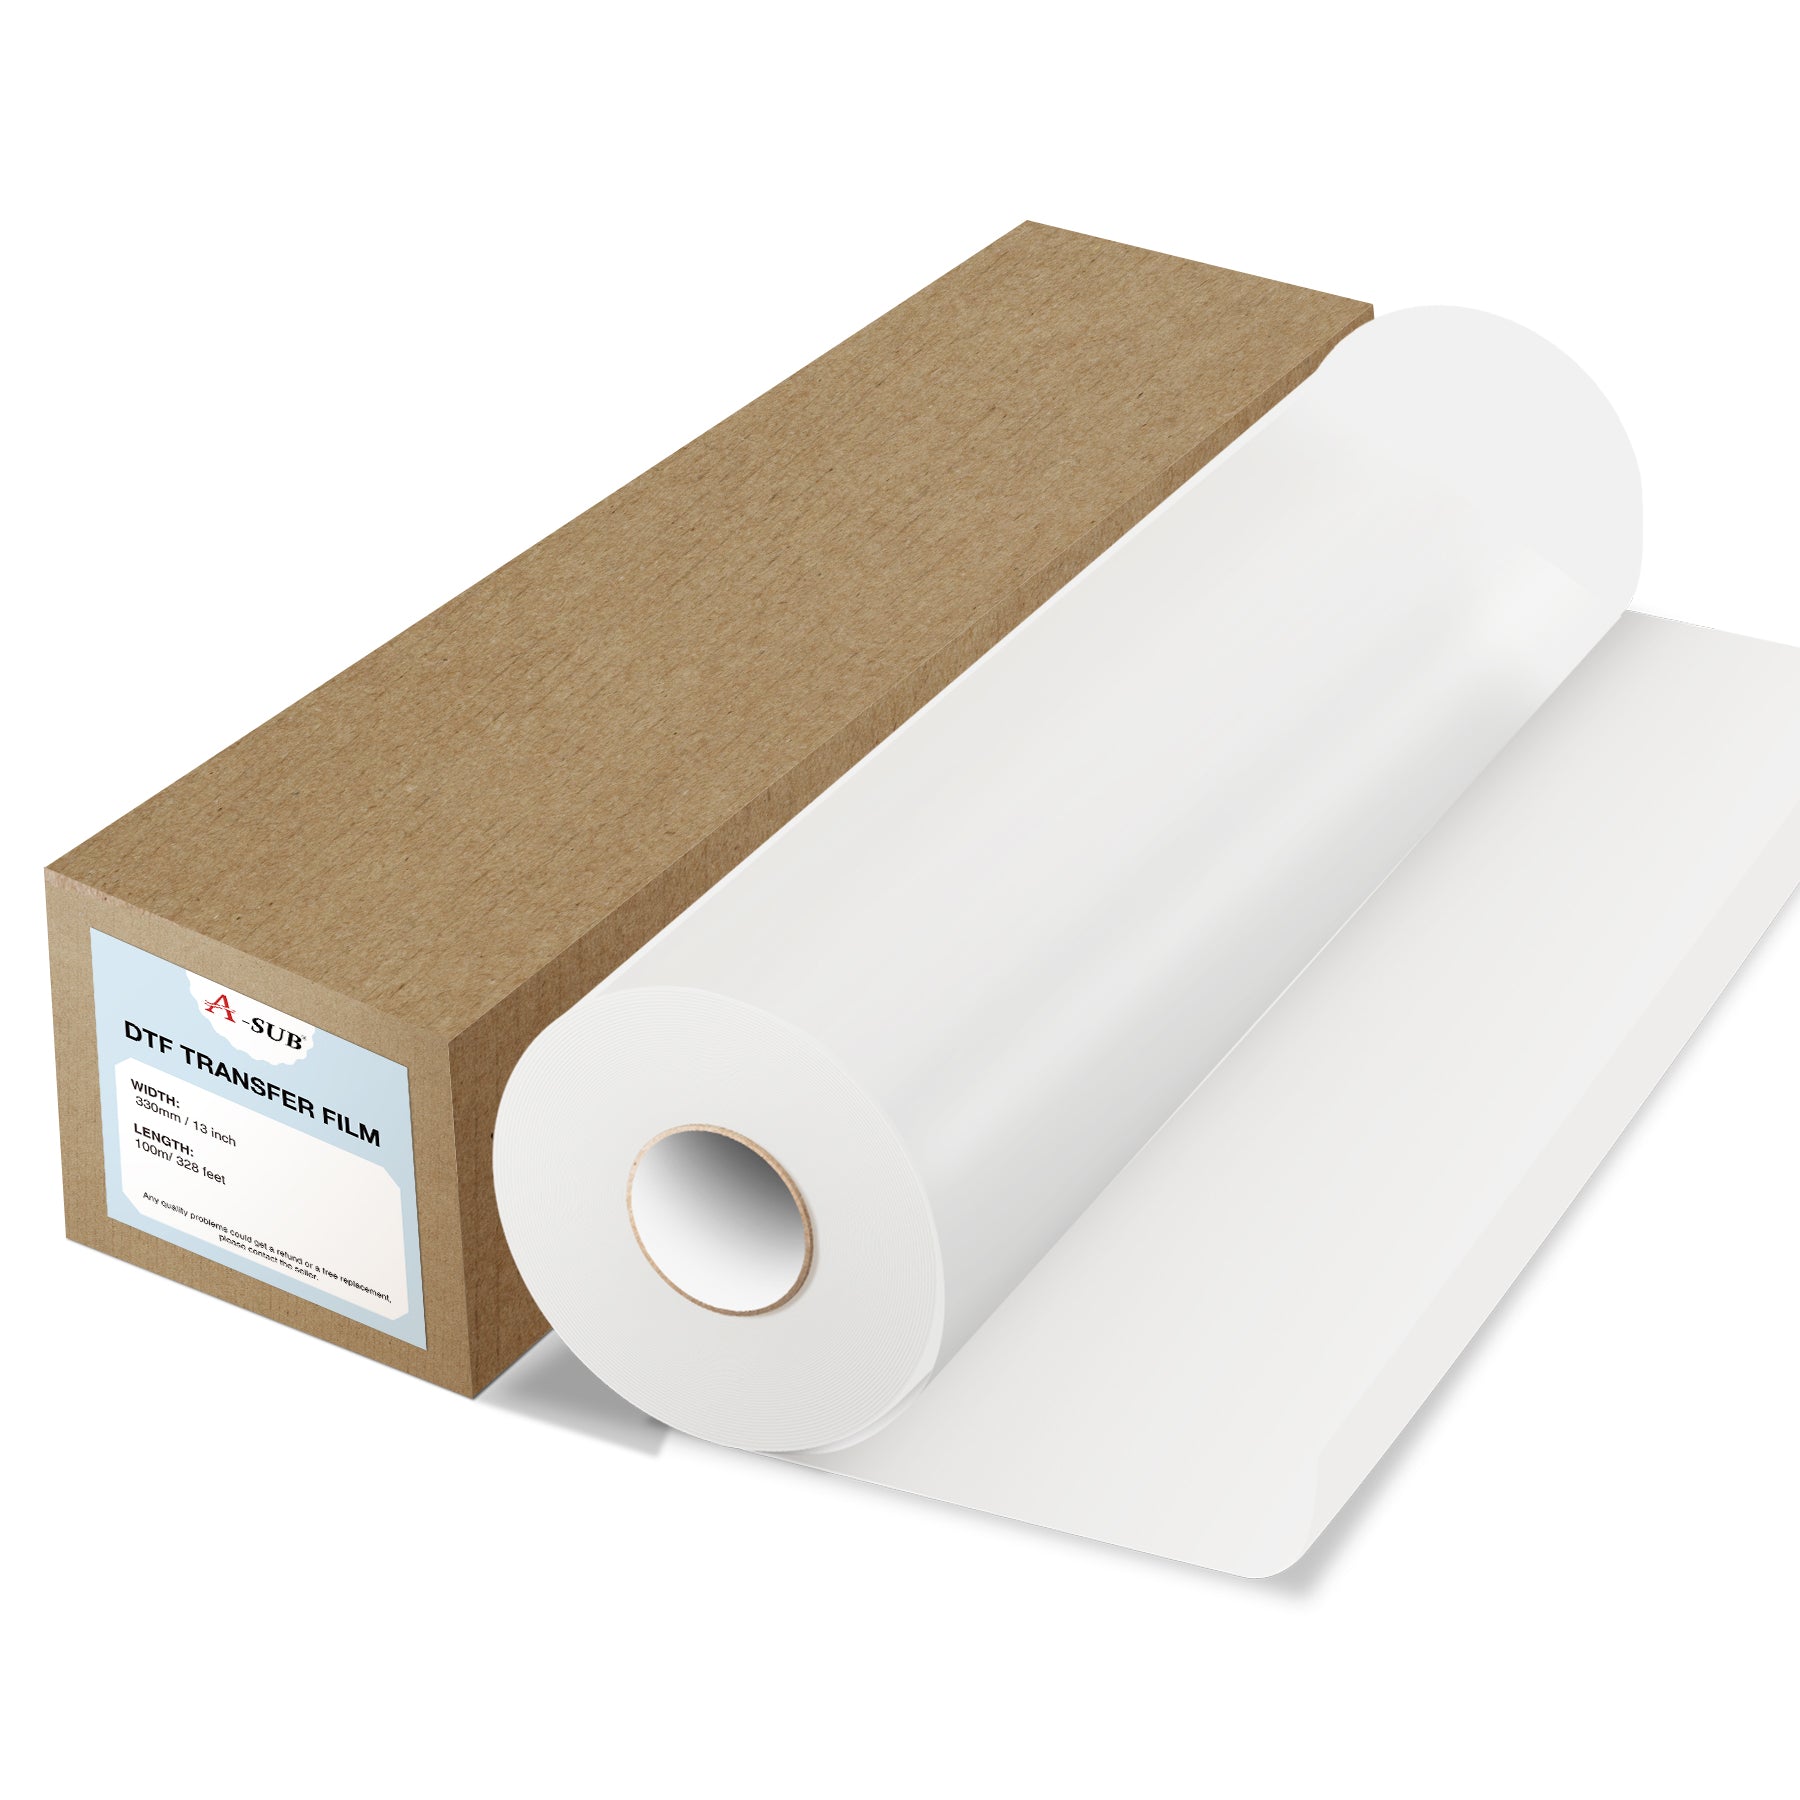 Yamation DTF Transfer Film Roll: 13inch Premium Double-sided Matte